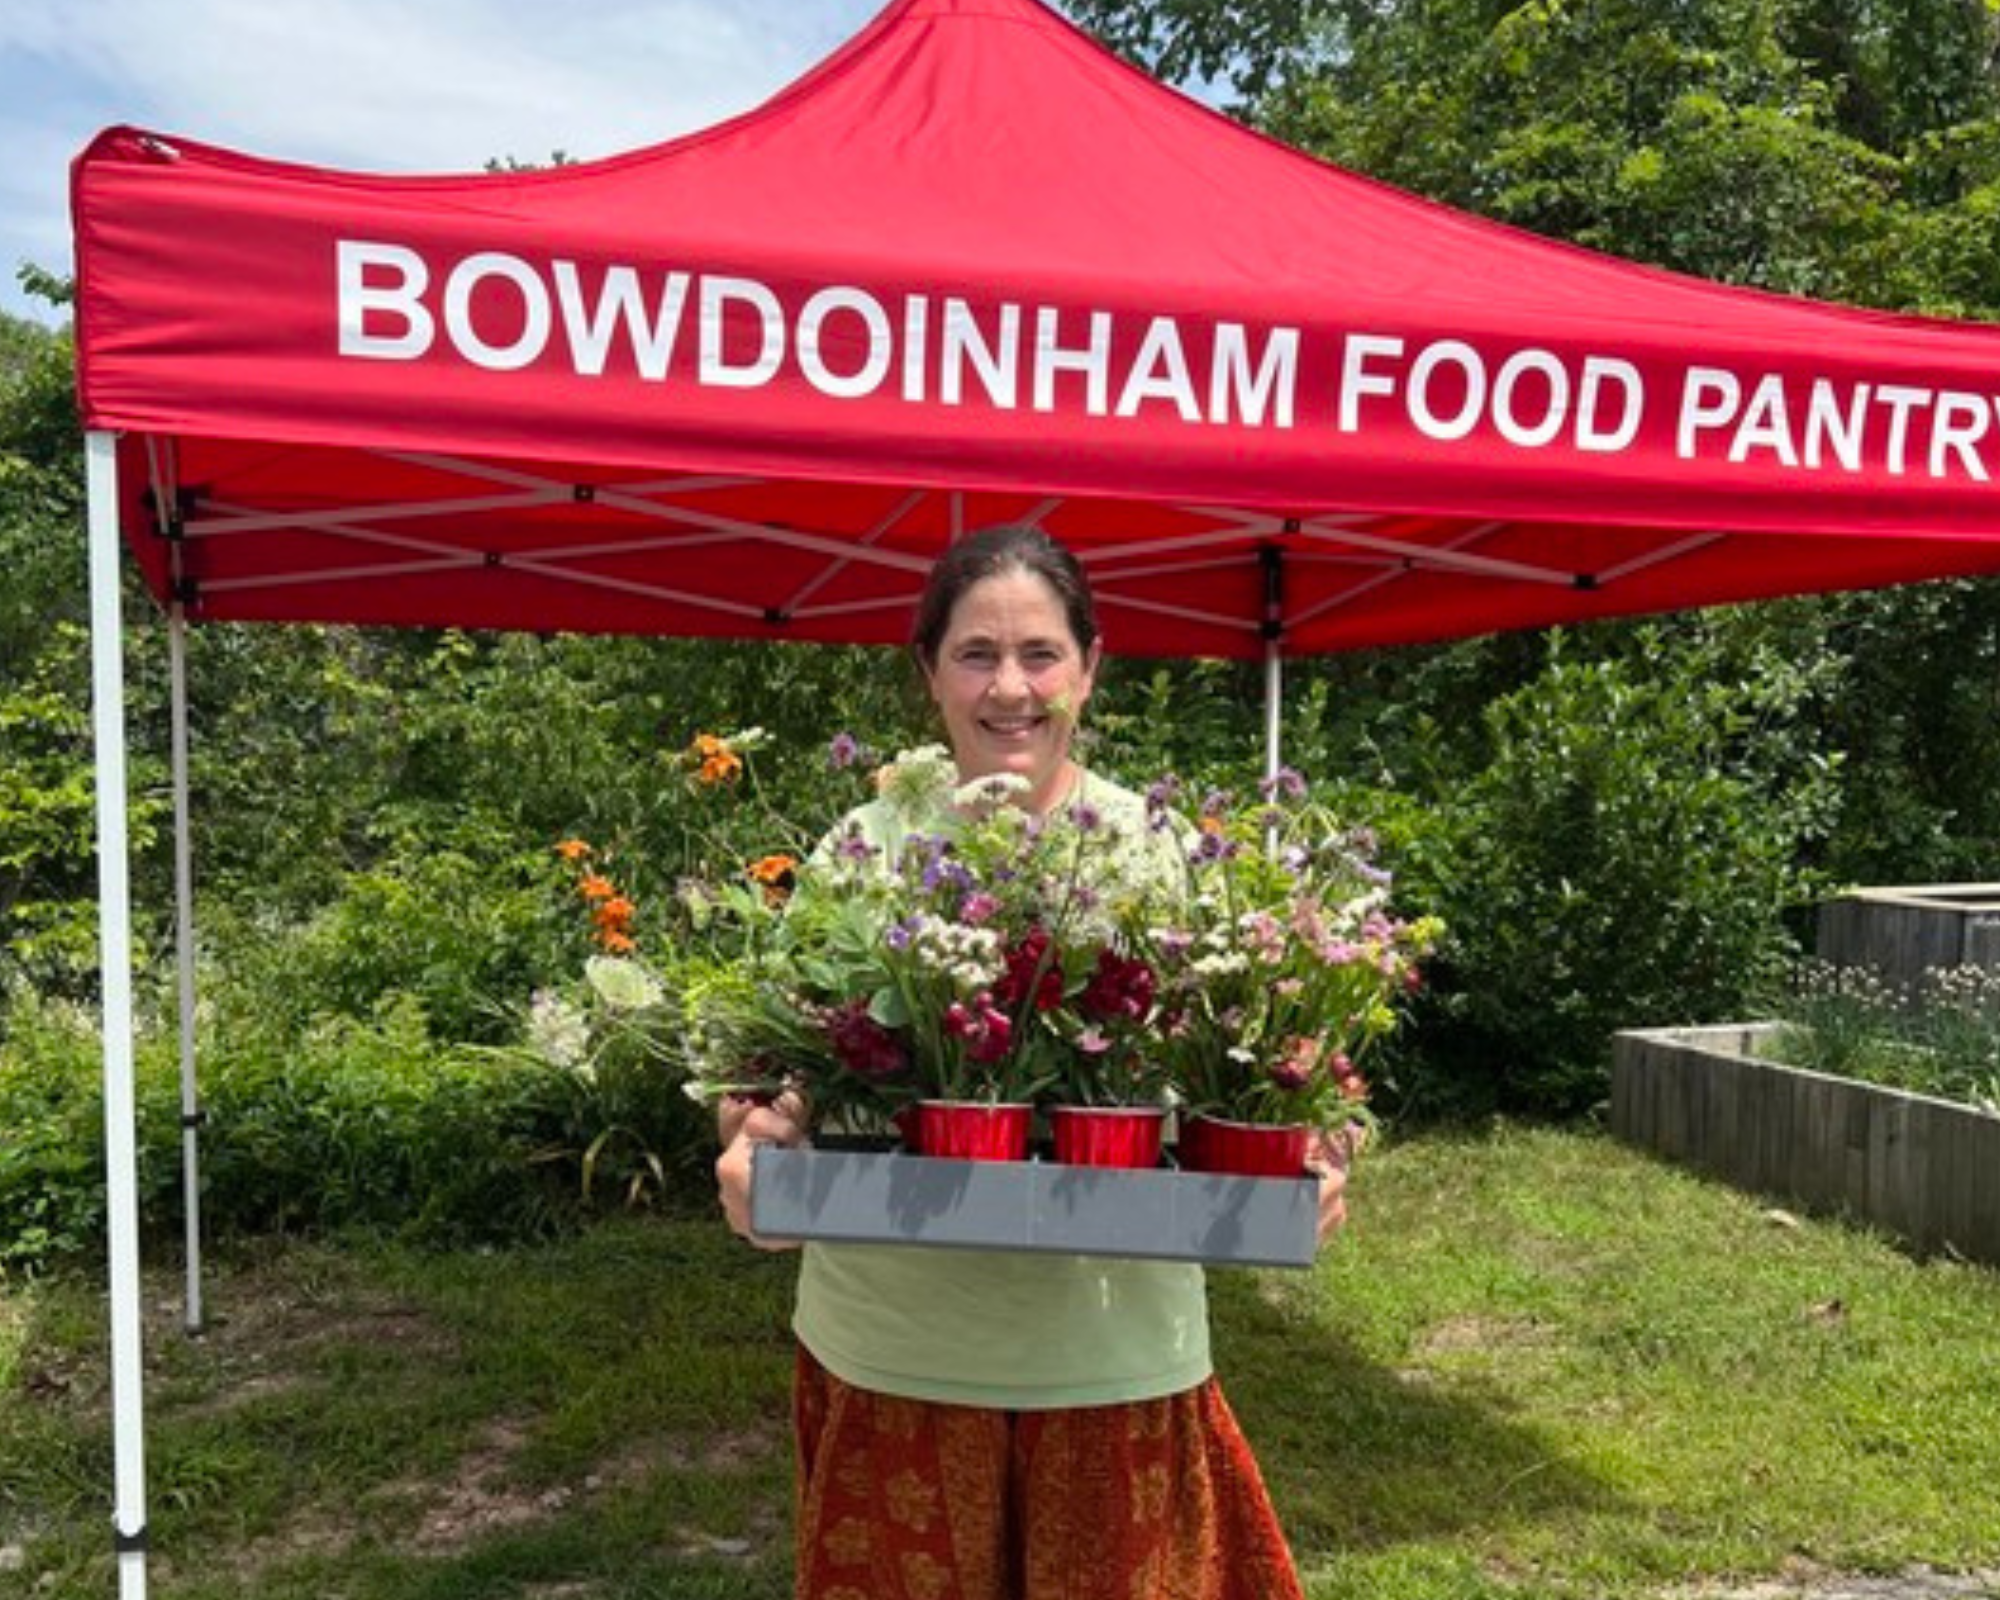 Stories from the Road: Bowdoinham Food Pantry inset